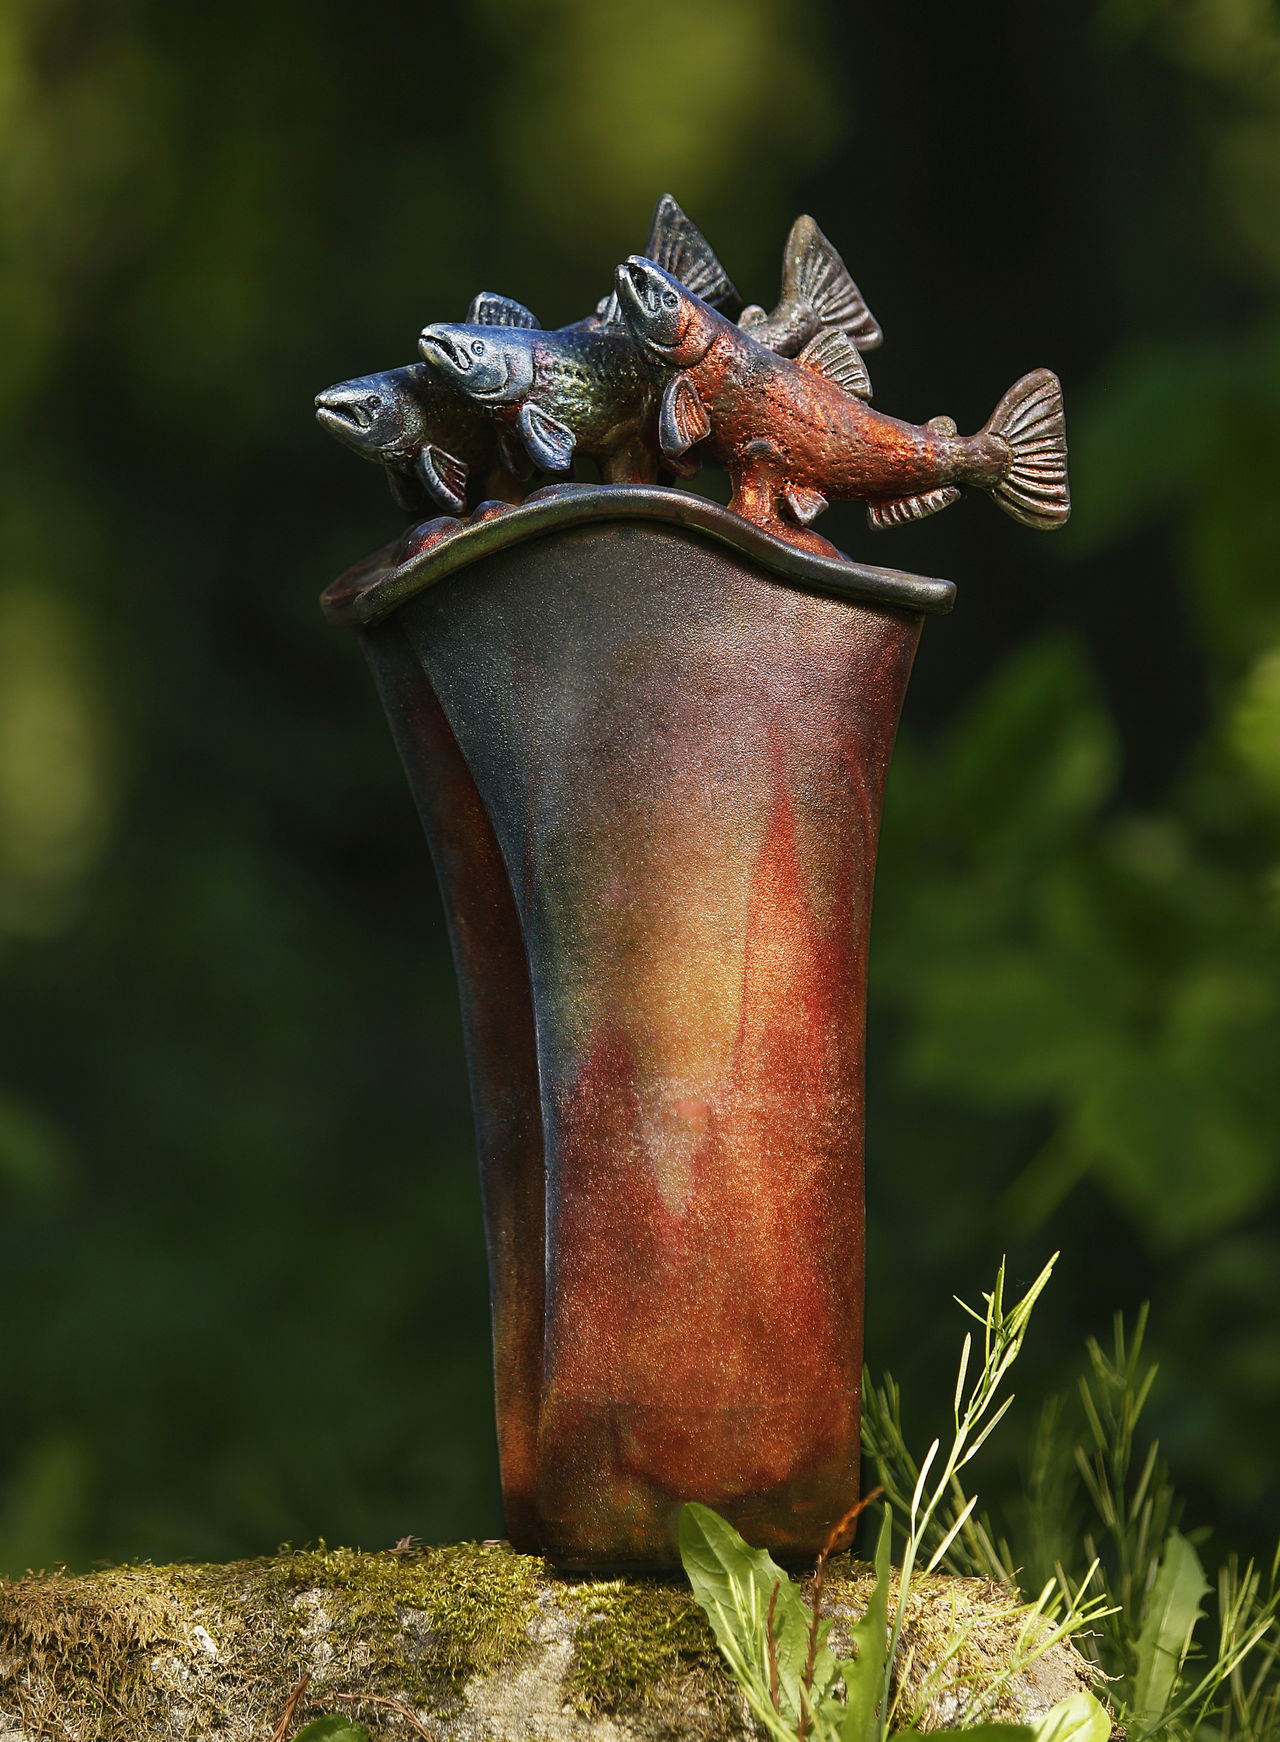 Clay artist Marguerite Goff’s raku pot “River Dance” is featured on this year’s Camano Island Studio Tour poster and guide.